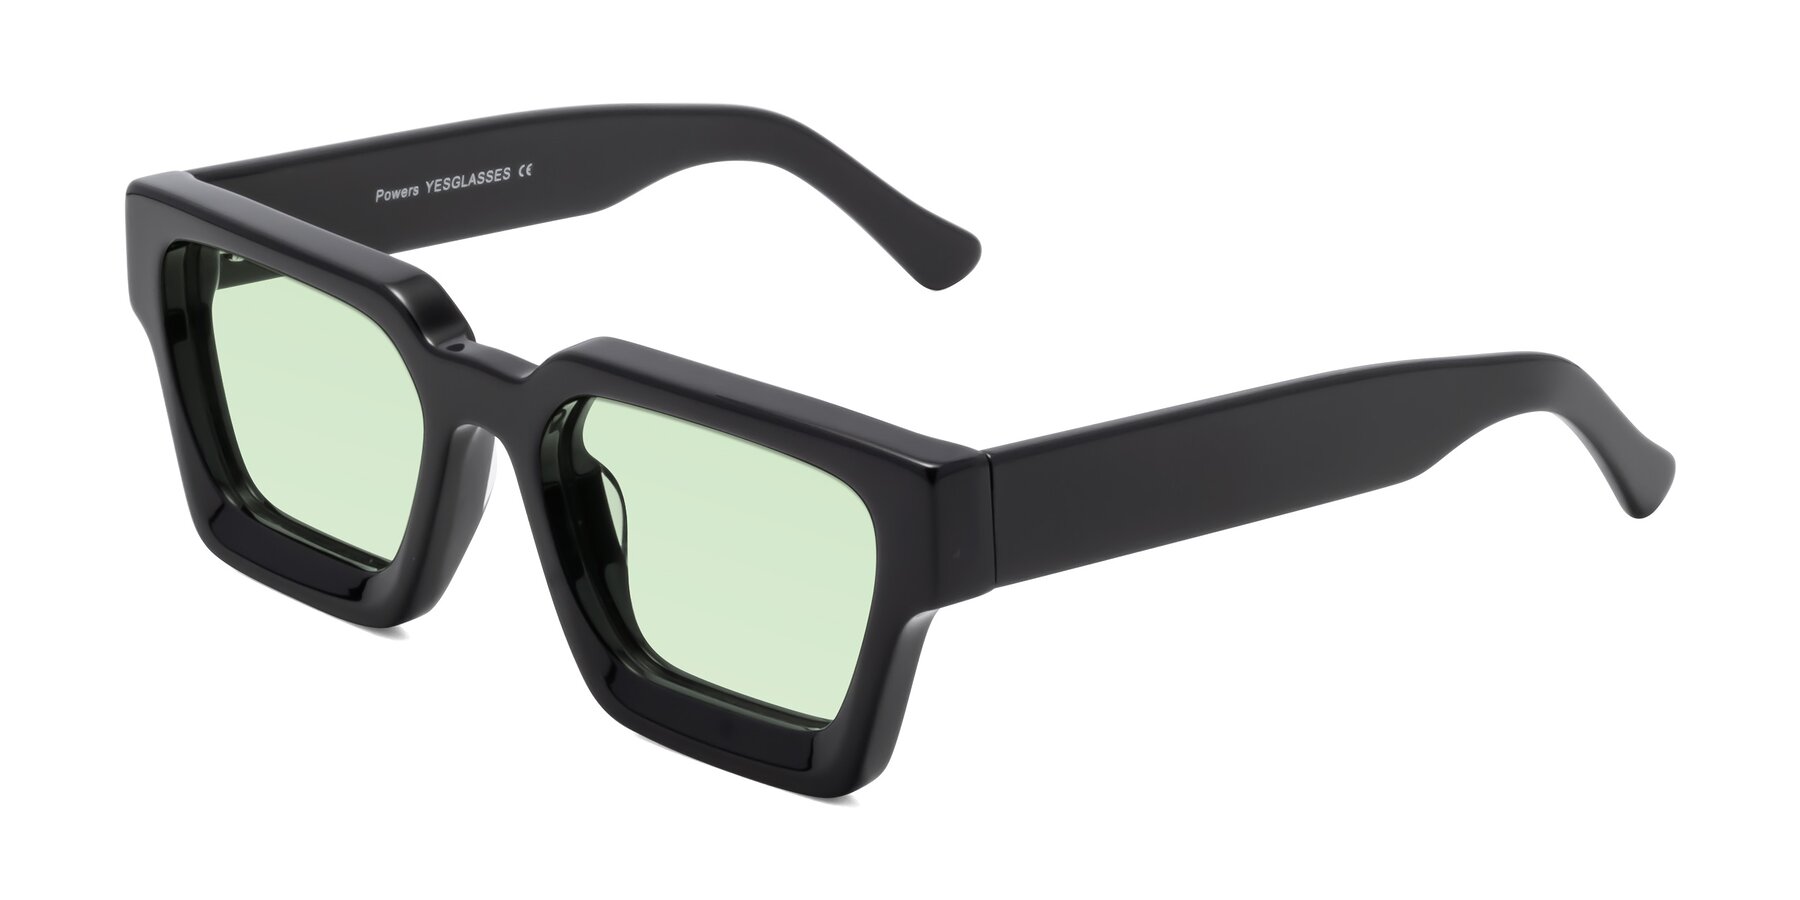 Angle of Powers in Black with Light Green Tinted Lenses